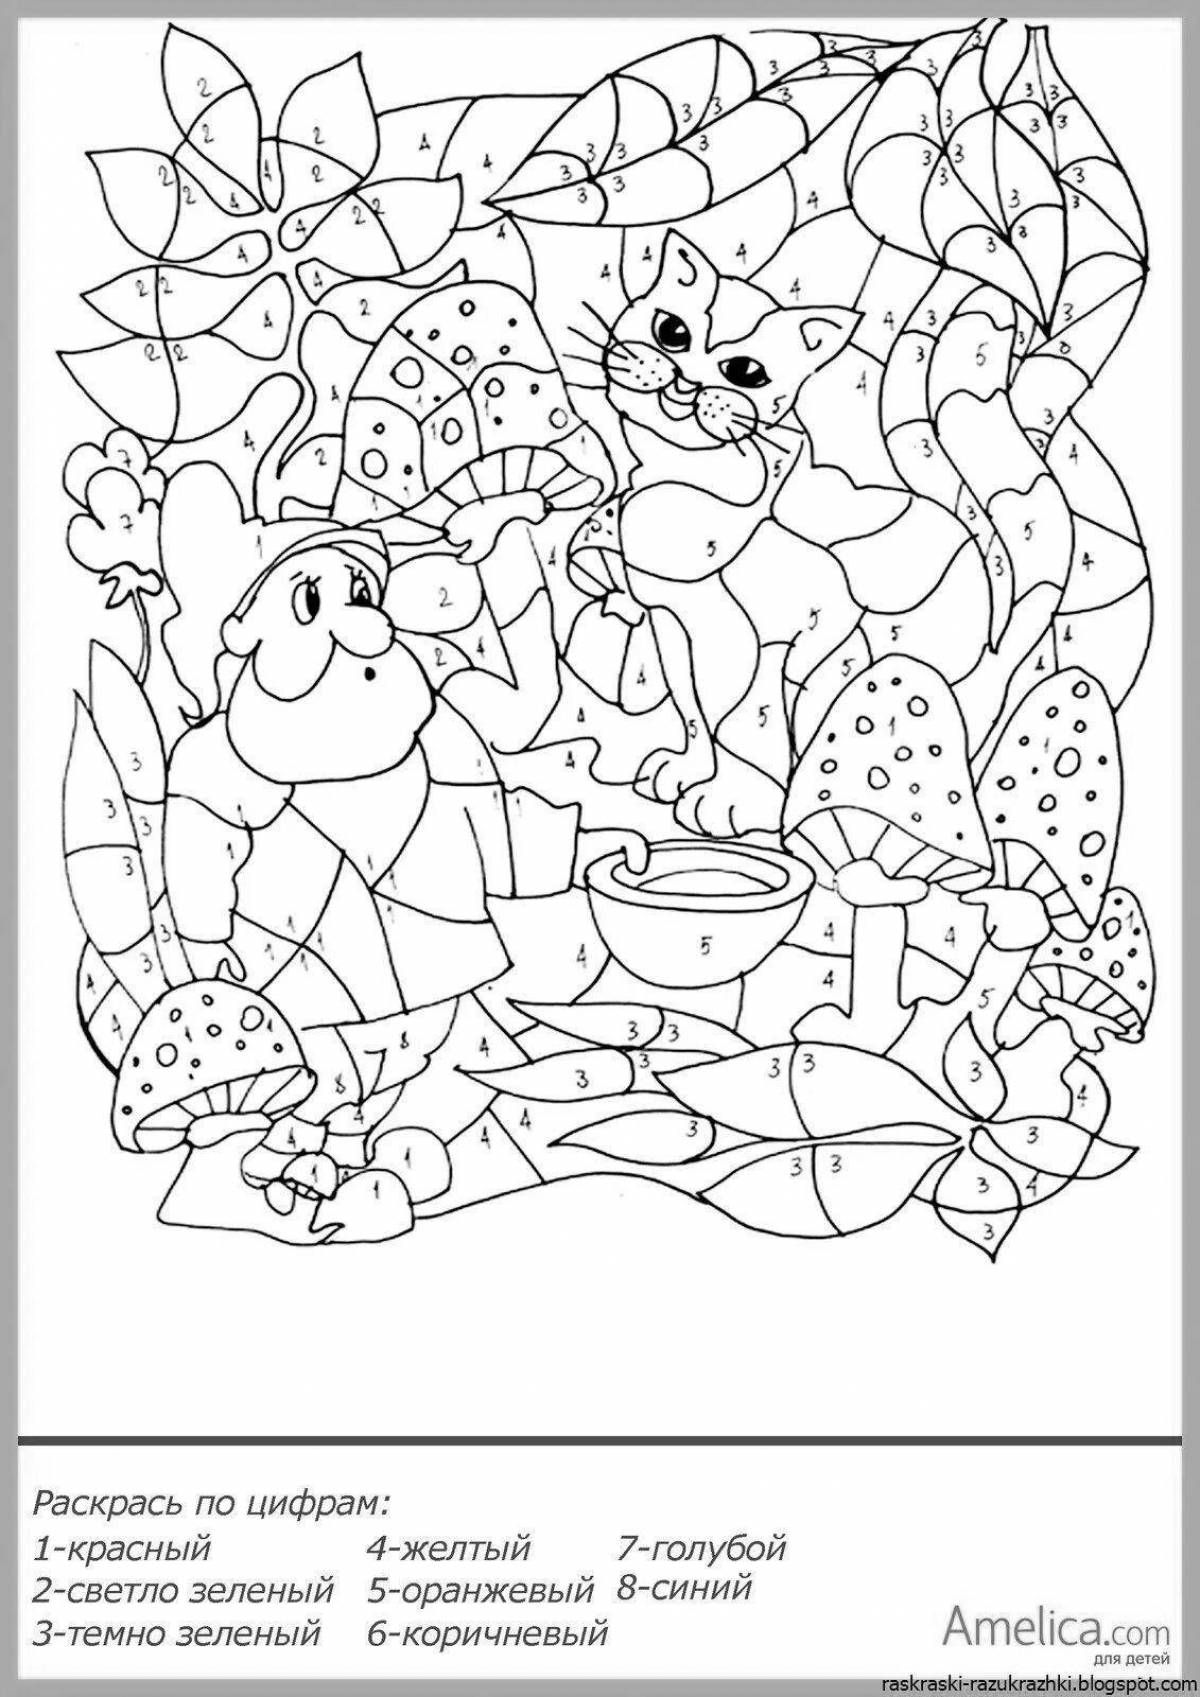 Entertaining coloring by numbers print